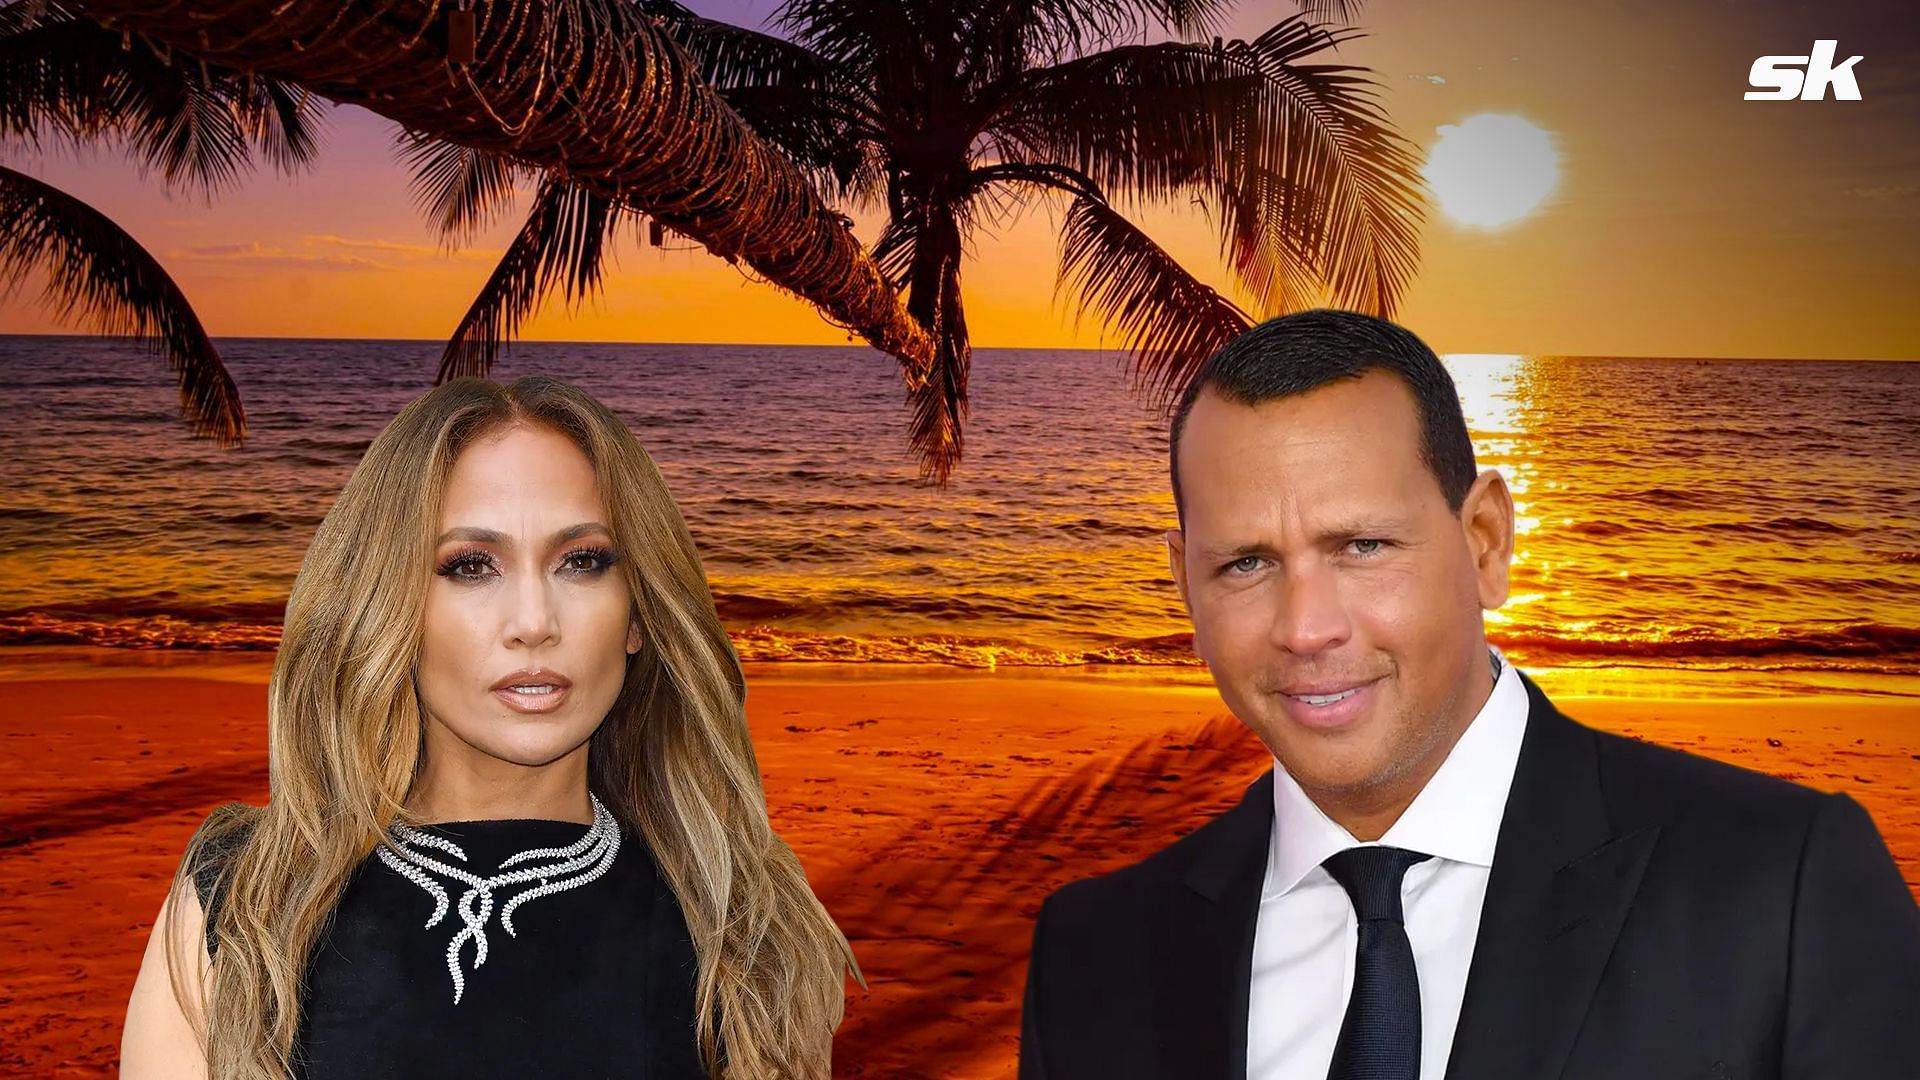 Jennifer Lopez was once effusive in her praise of Alex Rodriguez